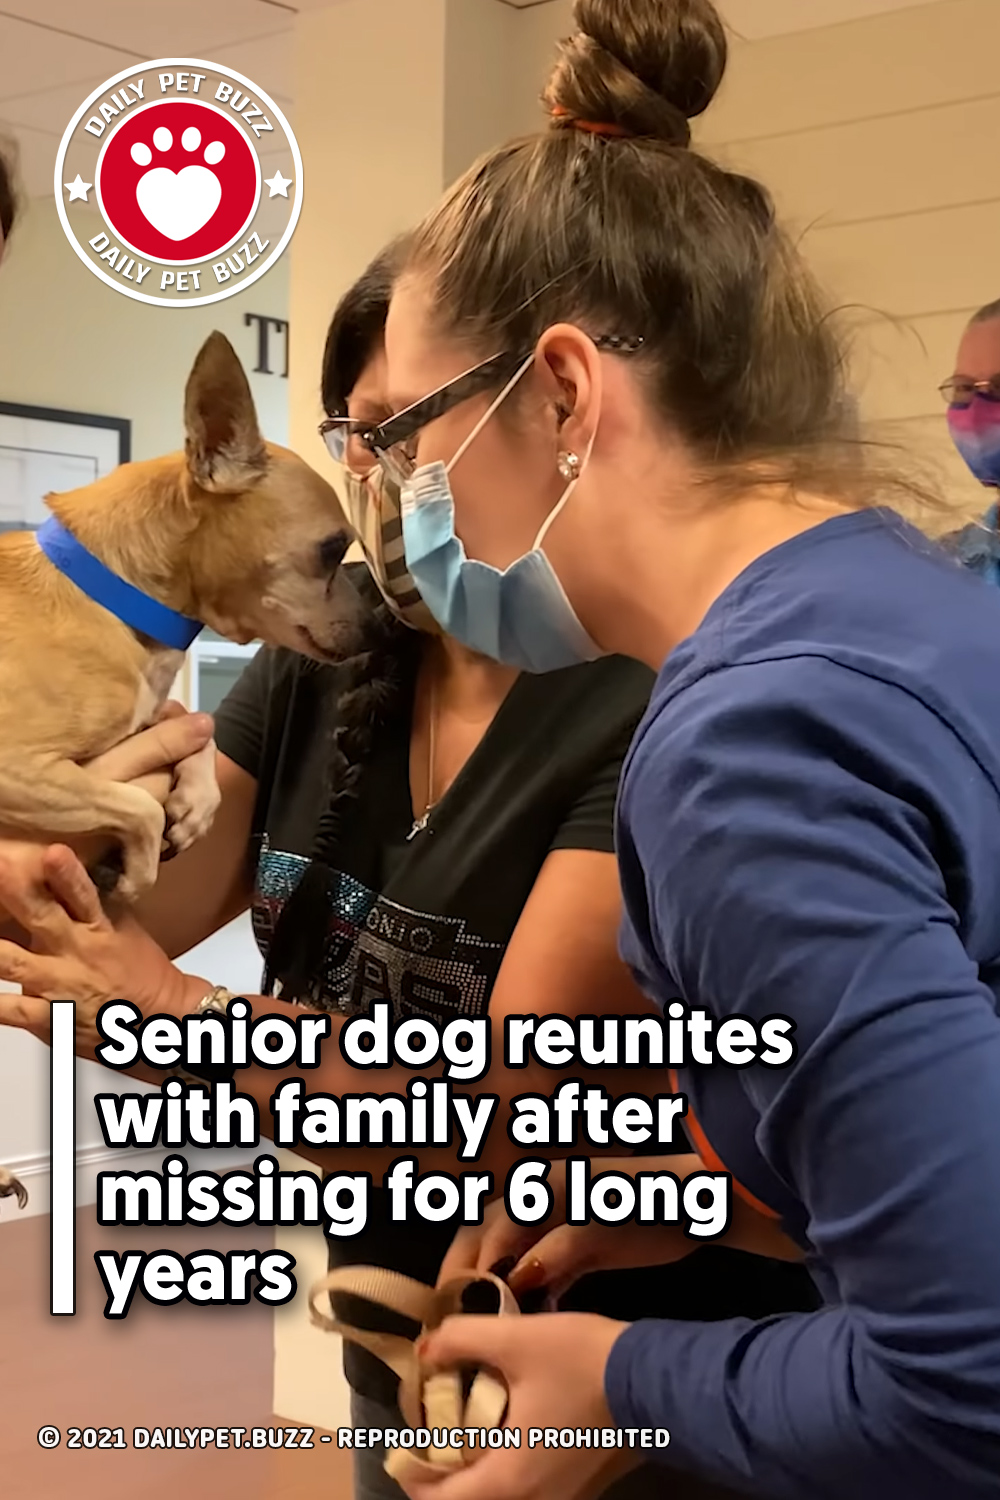 Senior dog reunites with family after missing for 6 long years